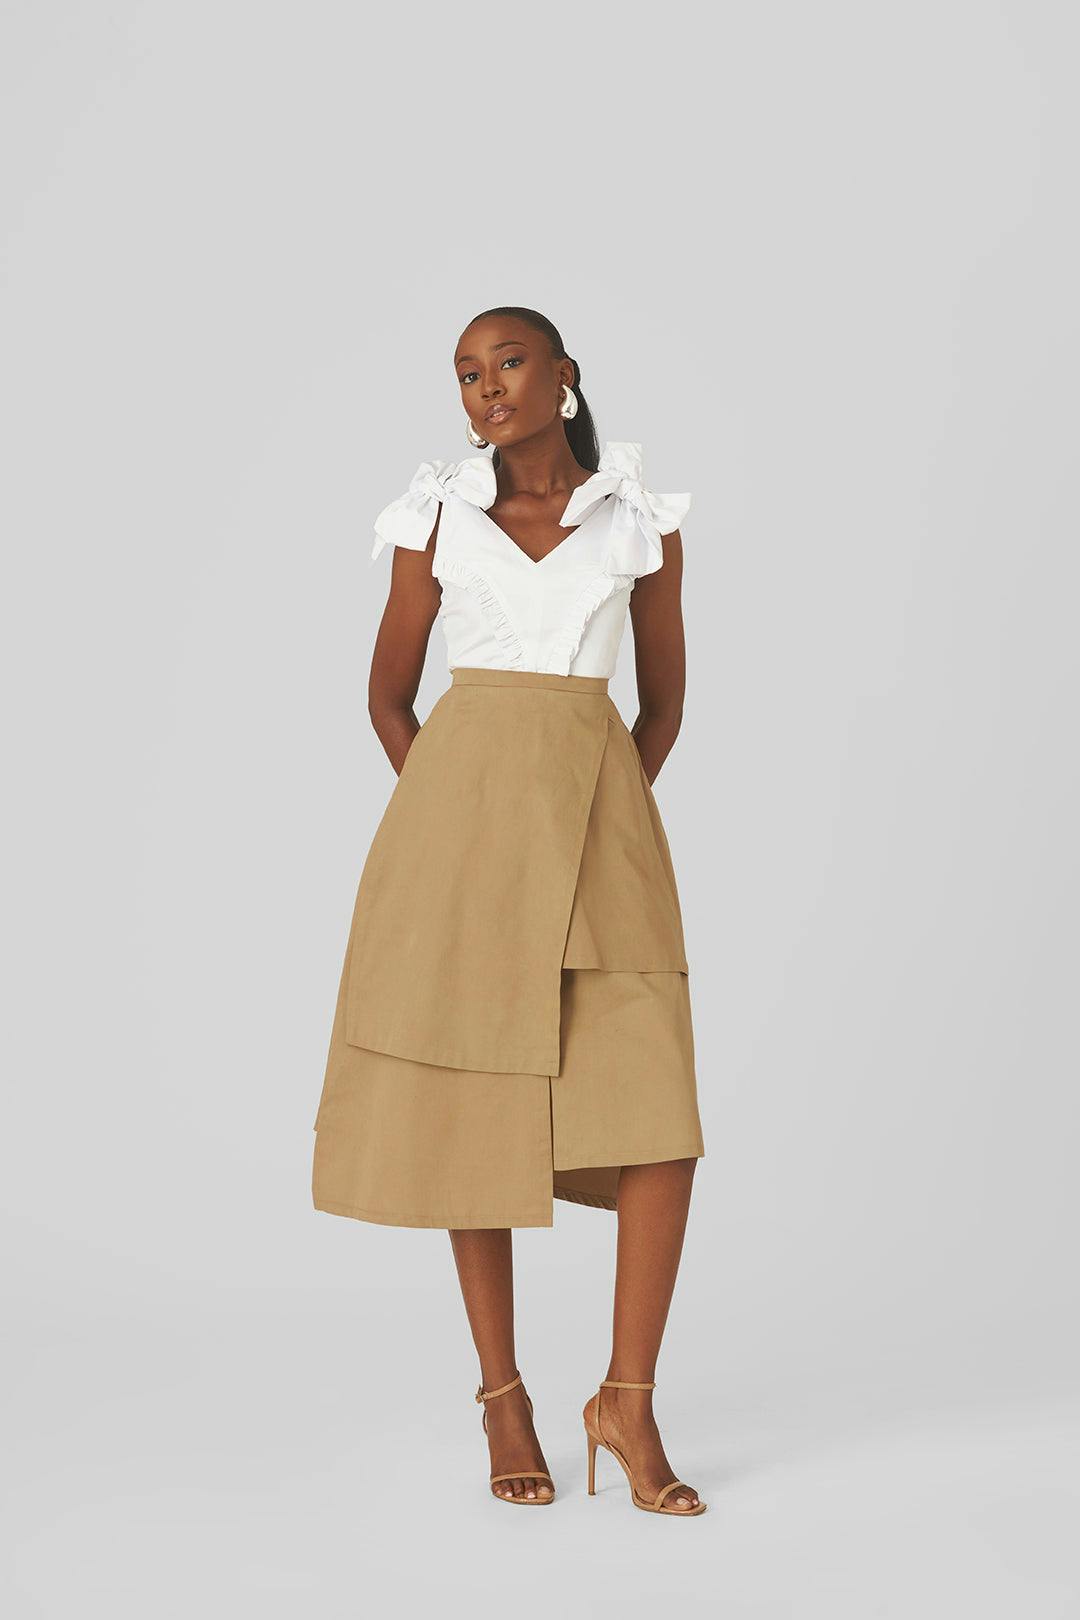 Tola Skirt, a product by M.O.T the Label